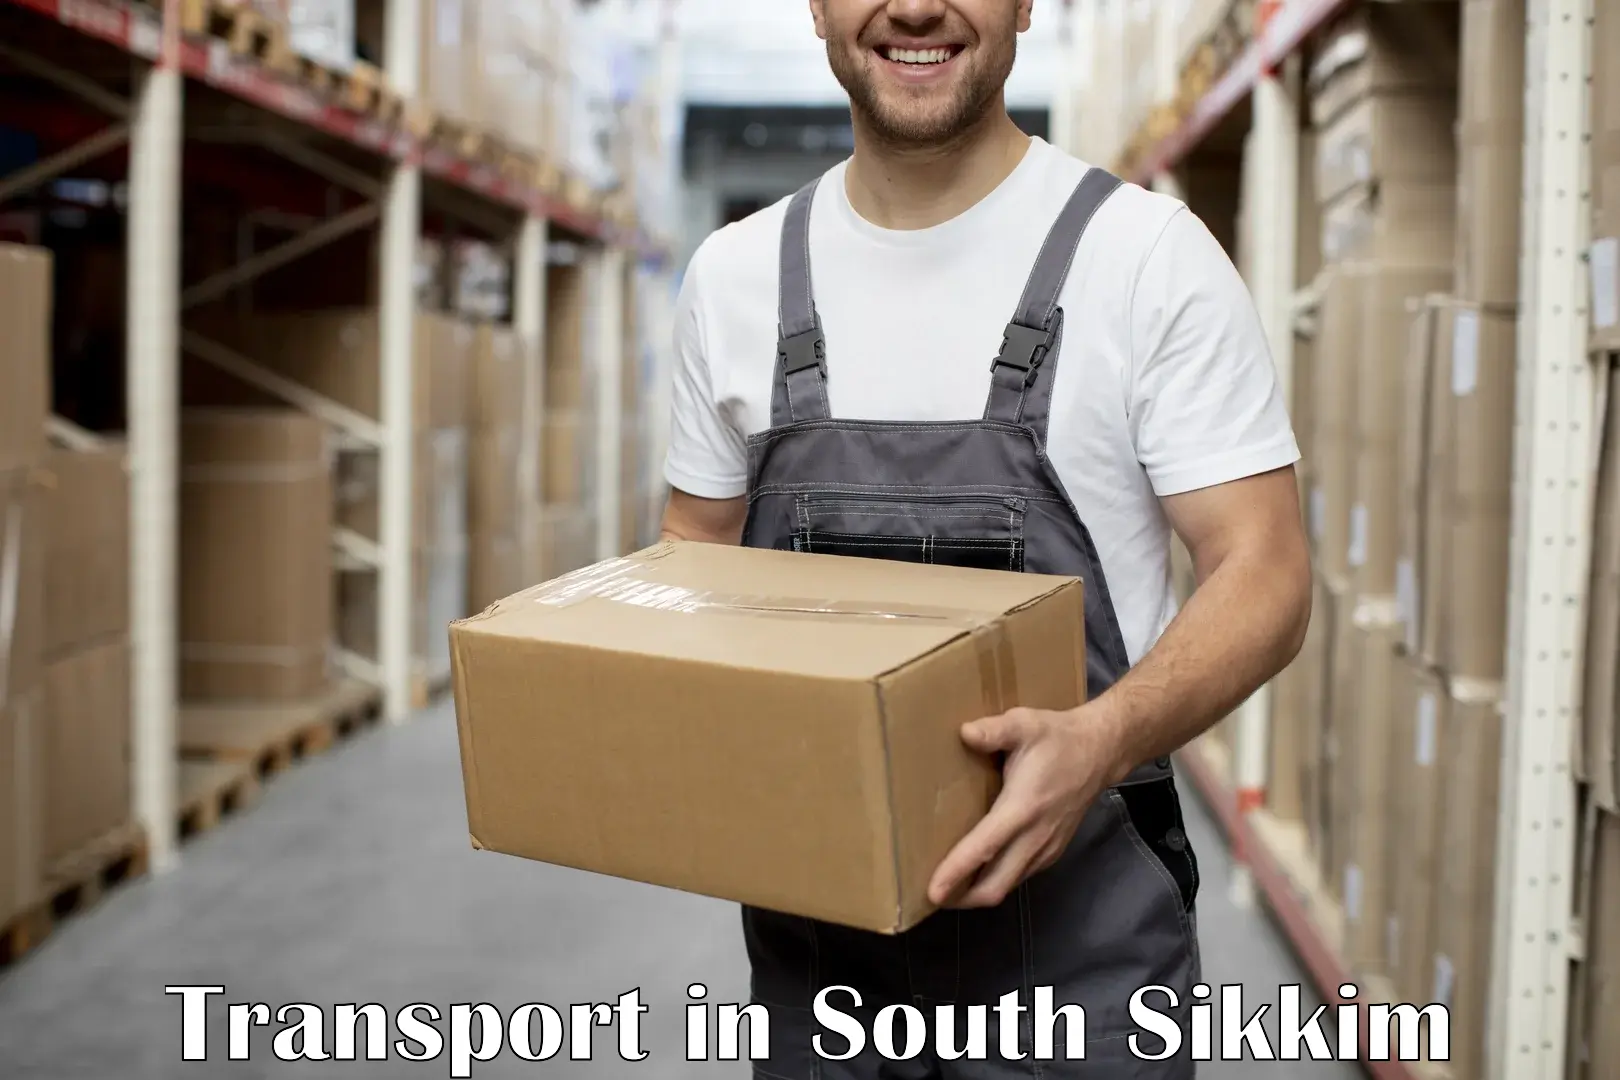 Road transport services in South Sikkim